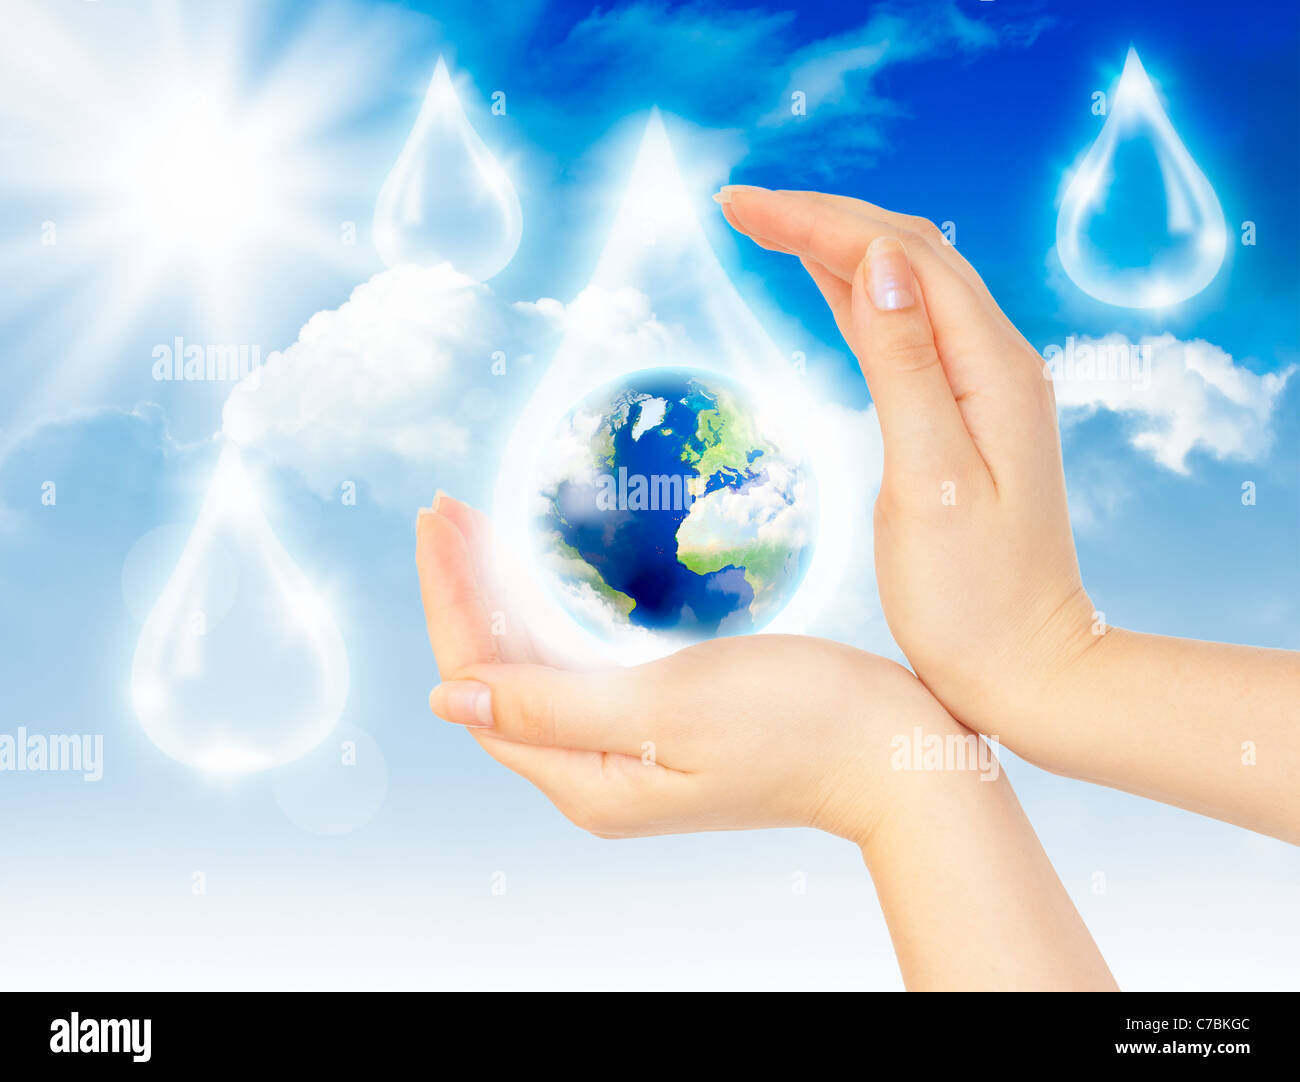 Drop of water with Earth inside and hands on sky background. The symbol of Save Planet. Stock Photo